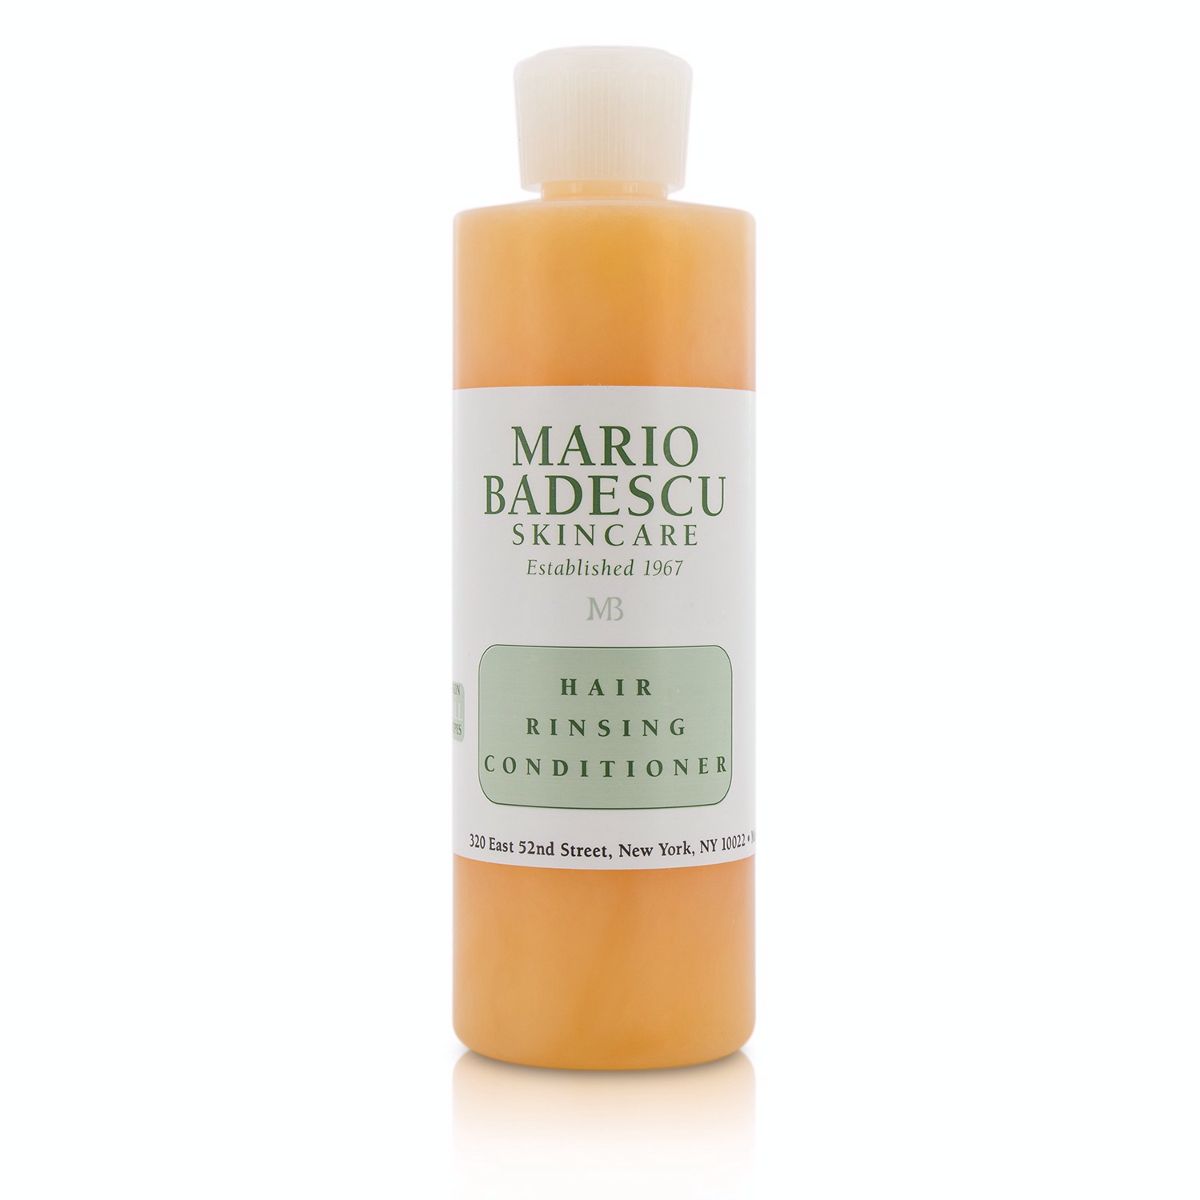 Hair Rinsing Conditioner (For All Hair Types) Mario Badescu Image